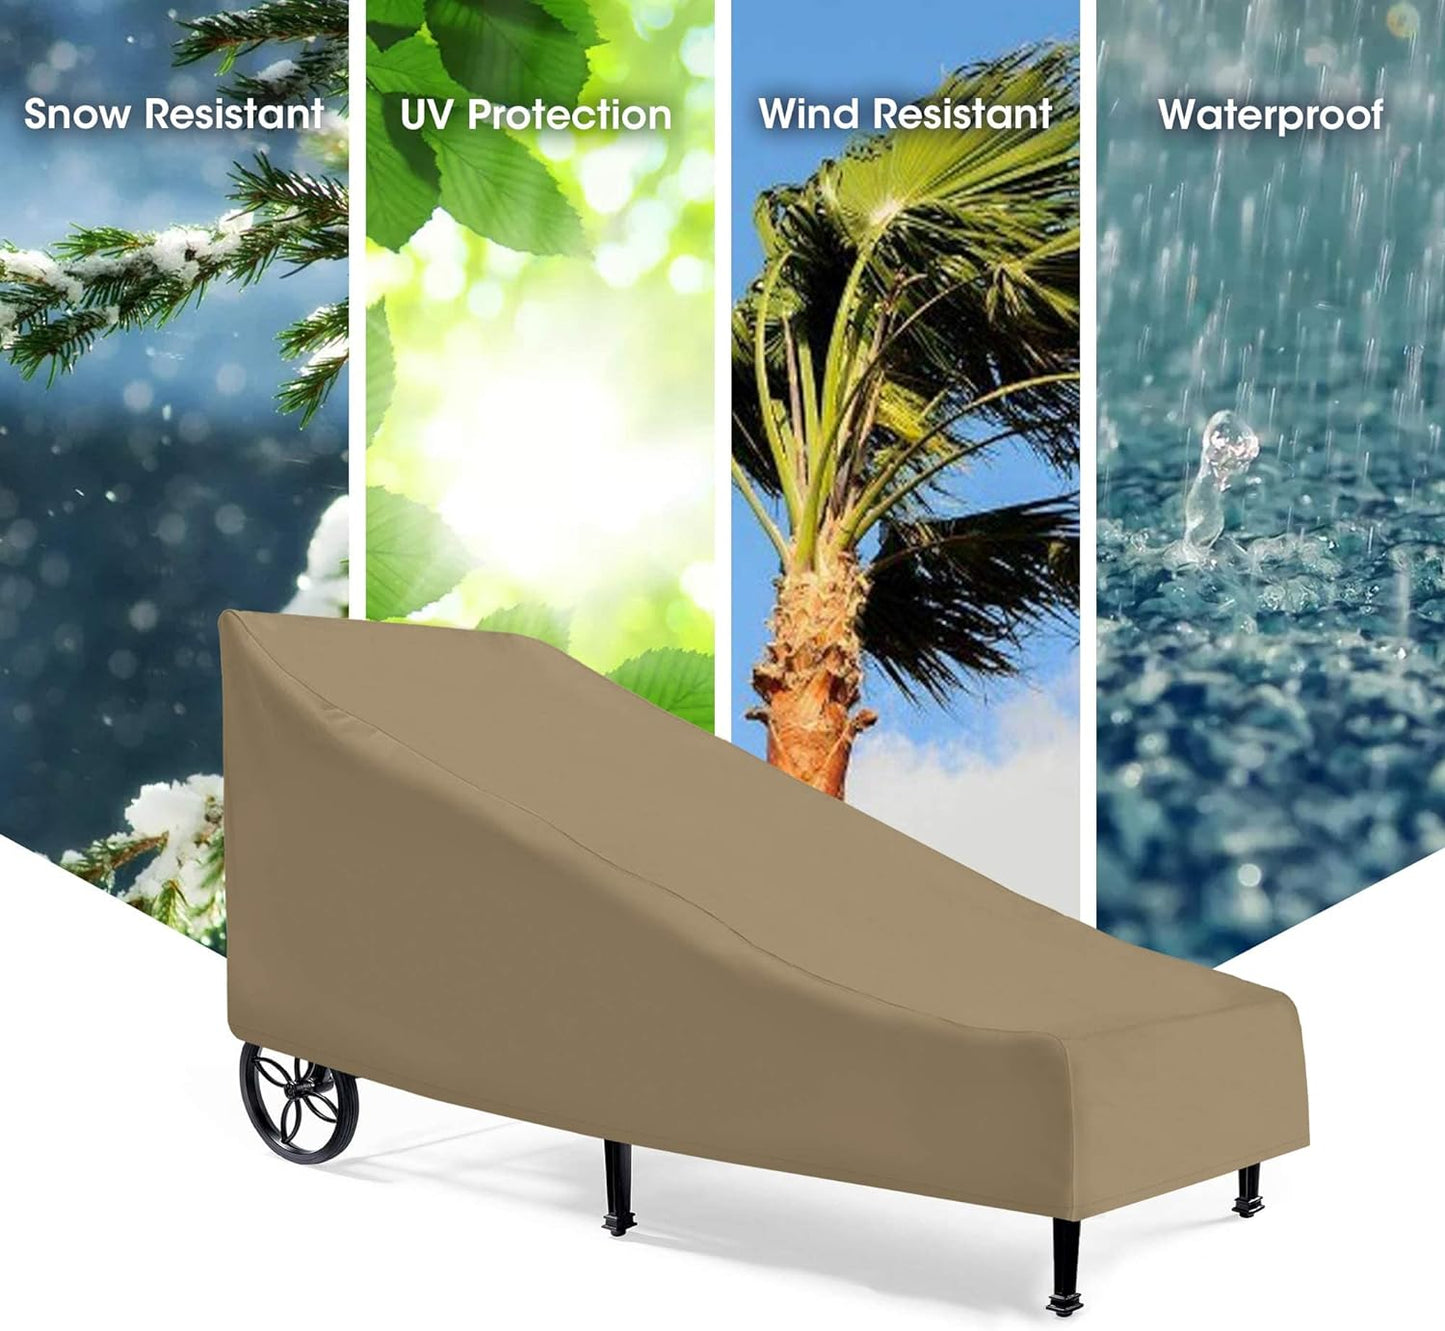 "Waterproof 76" Outdoor Chaise Lounge Cover: Heavy Duty, All-Weather Protection (Taupe)"